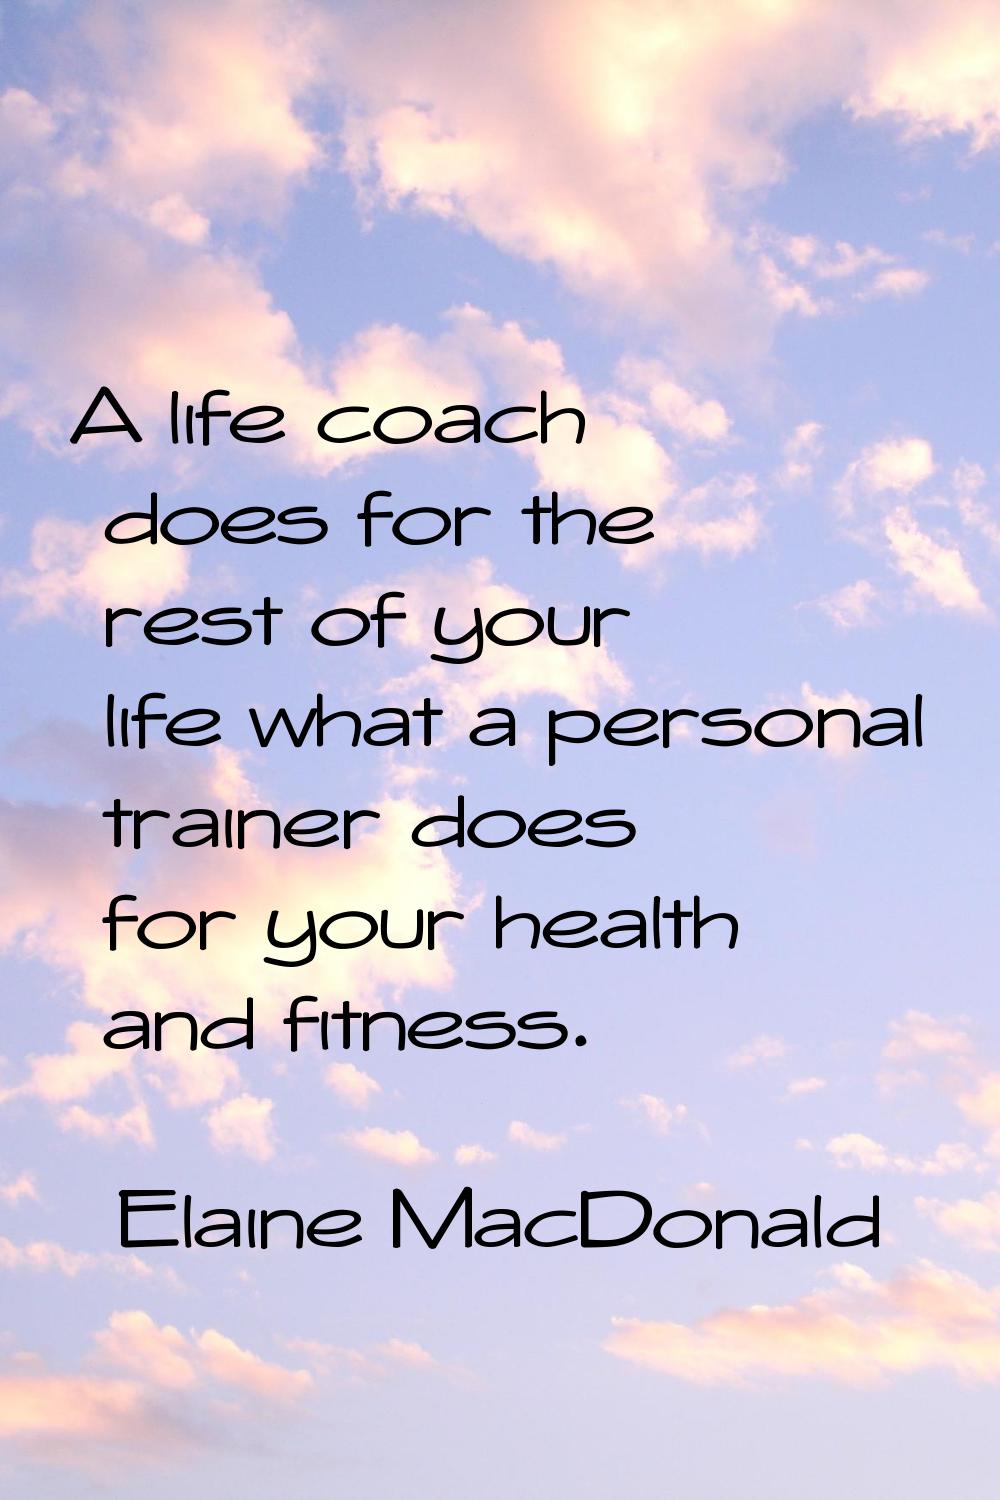 A life coach does for the rest of your life what a personal trainer does for your health and fitnes